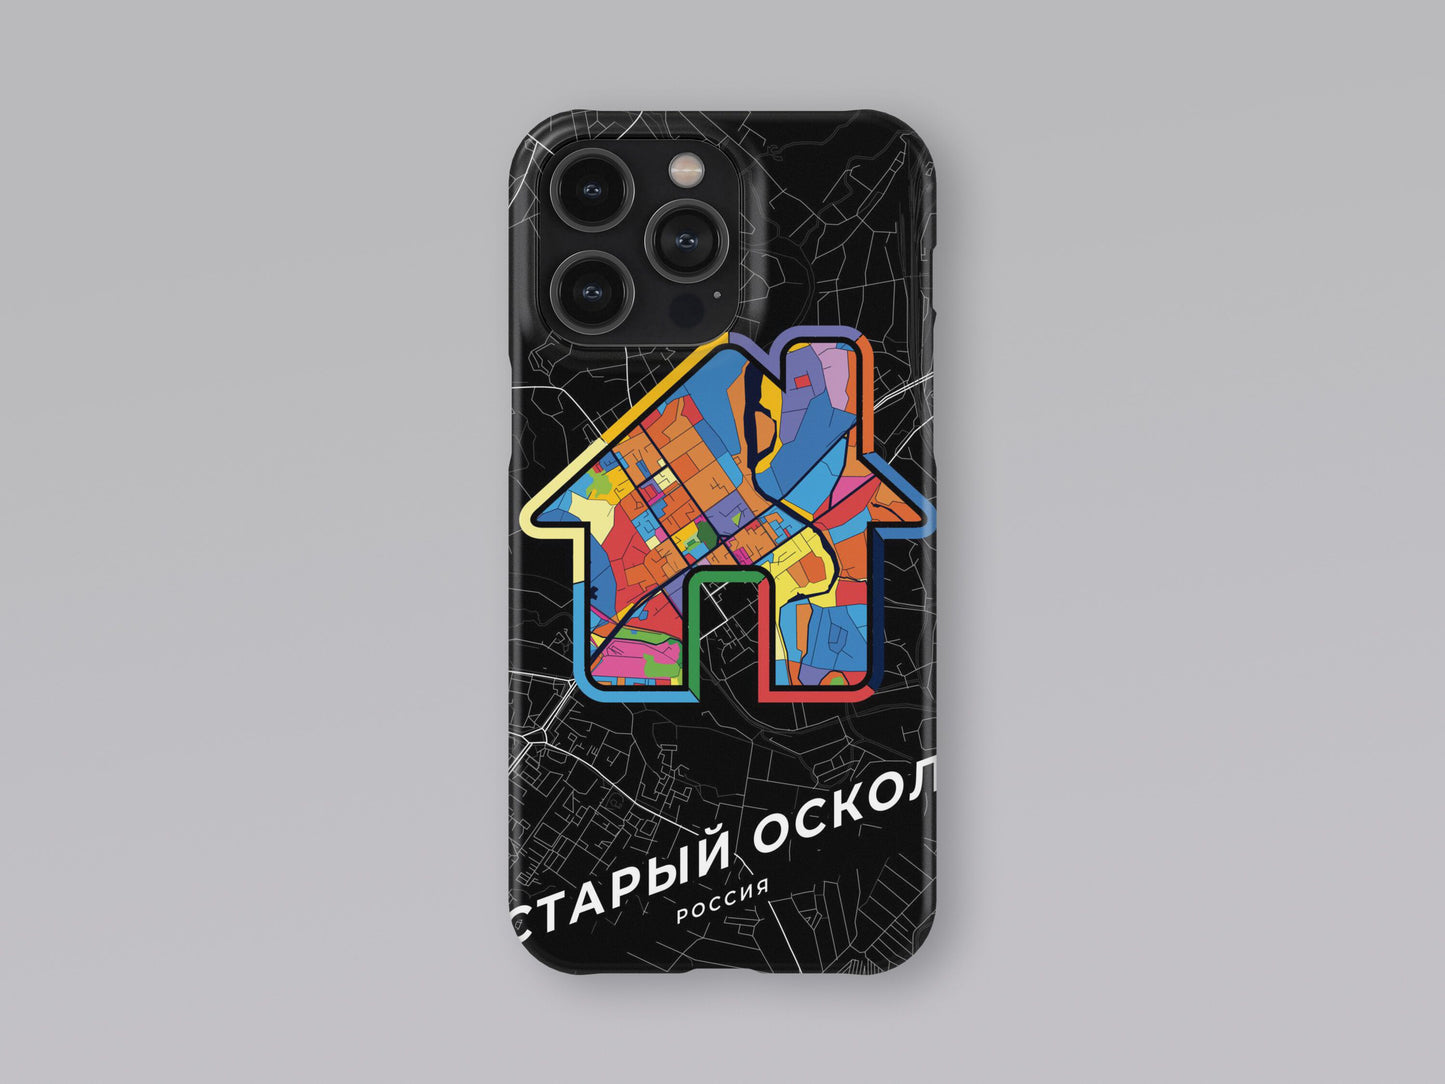 Stary Oskol Russia slim phone case with colorful icon 3